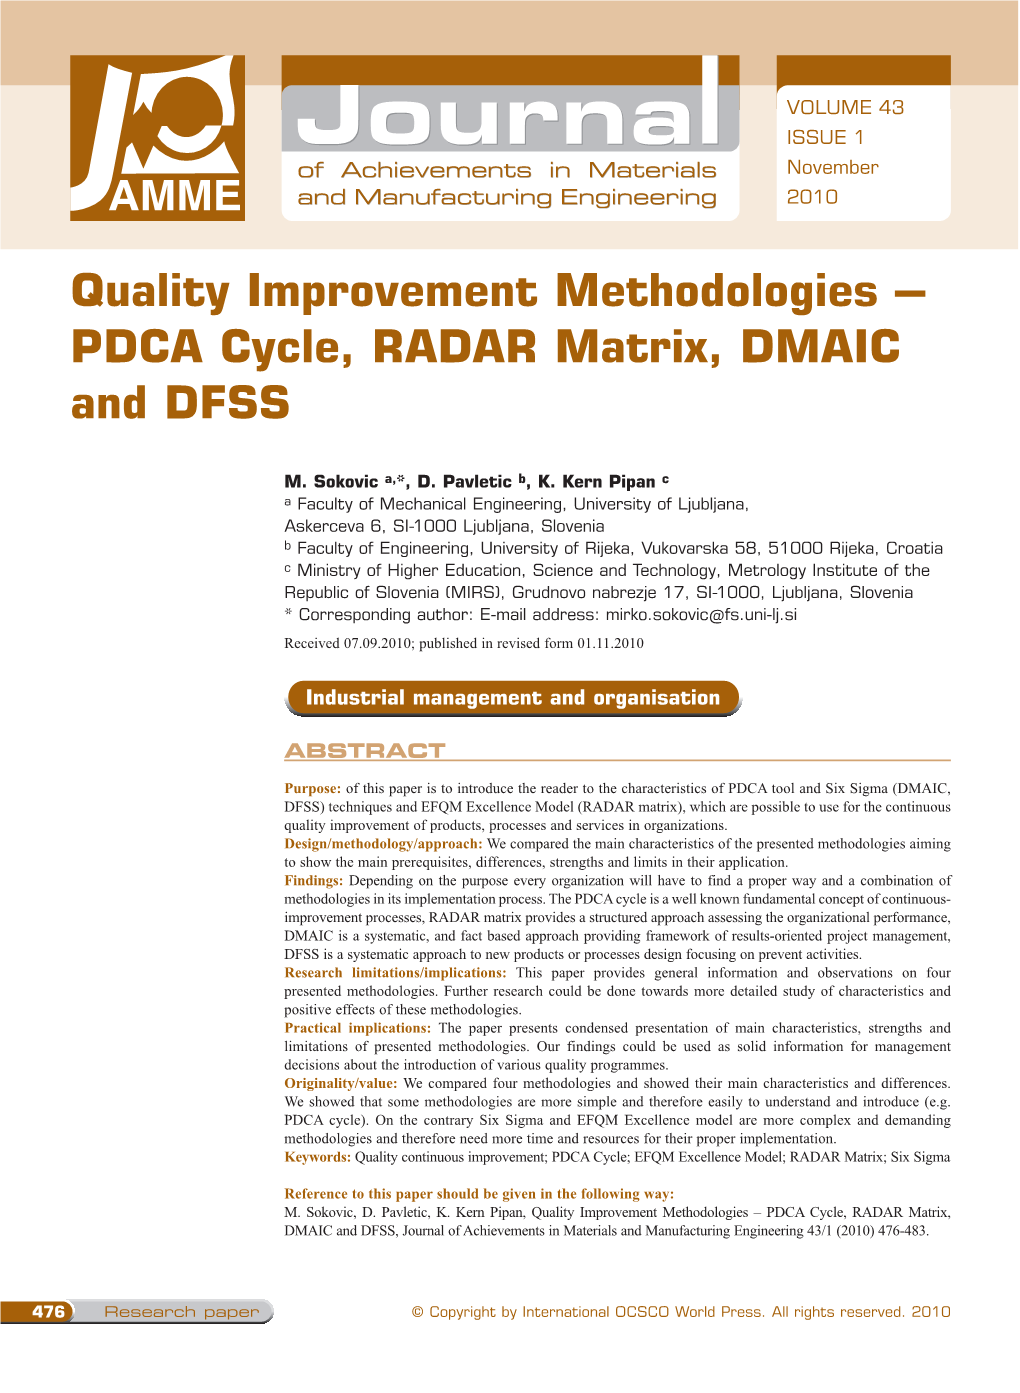 PDCA Cycle, RADAR Matrix, DMAIC and DFSS, Journal of Achievements in Materials and Manufacturing Engineering 43/1 (2010) 476-483